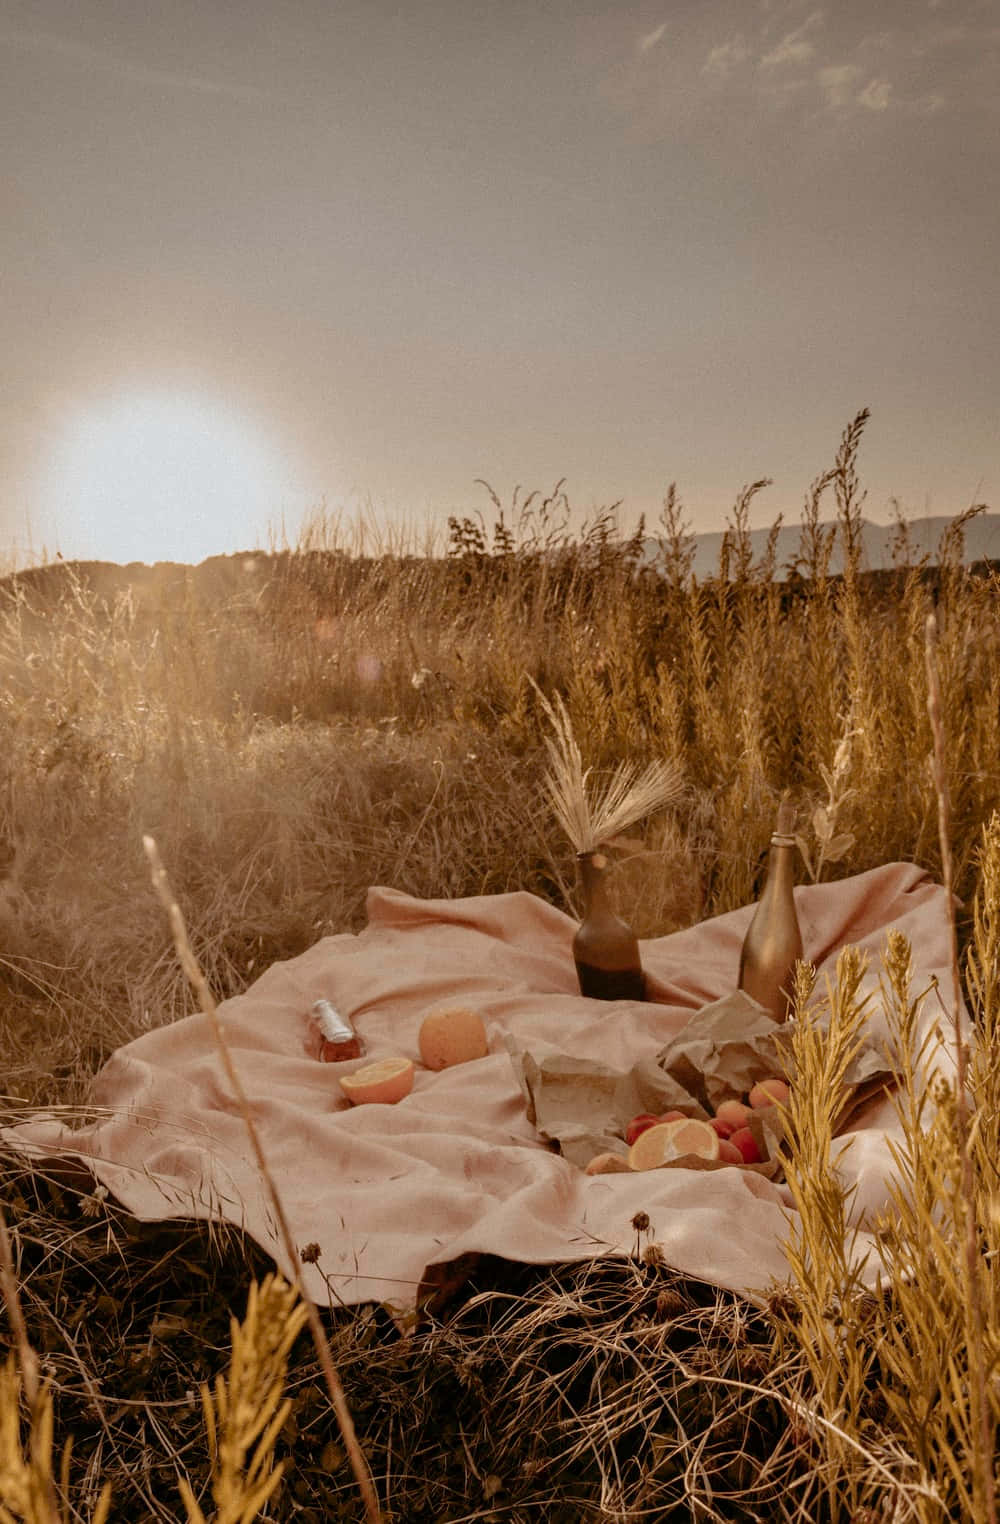 Picnic In The Field With Blanket And Food